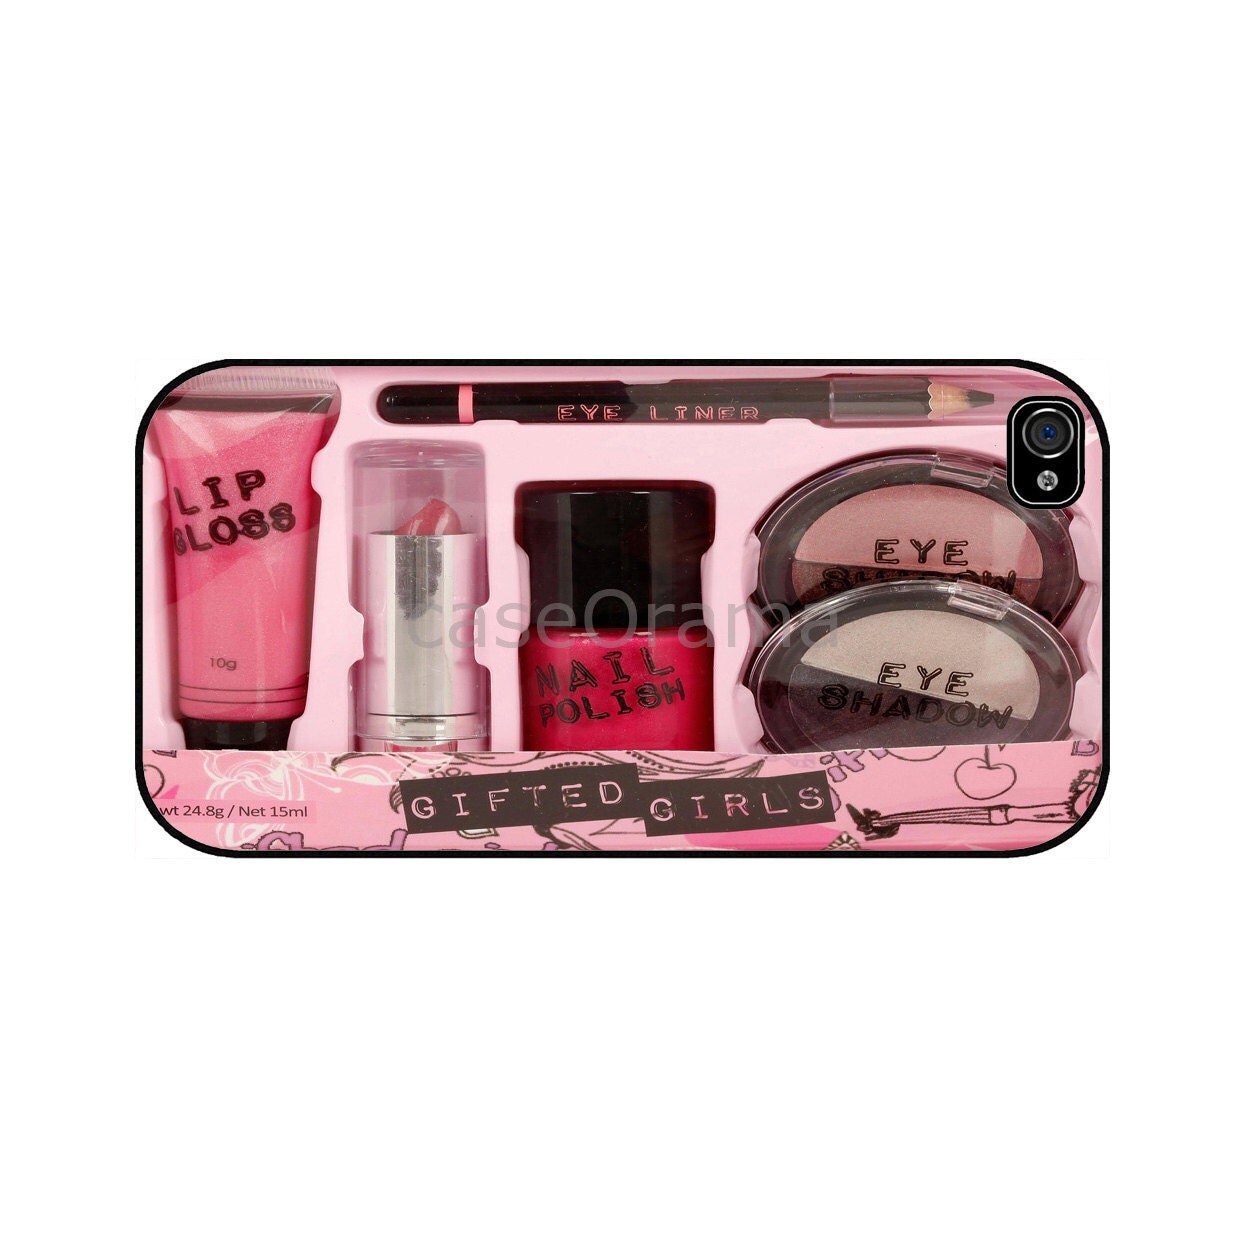 Iphone 4s Pink Cases